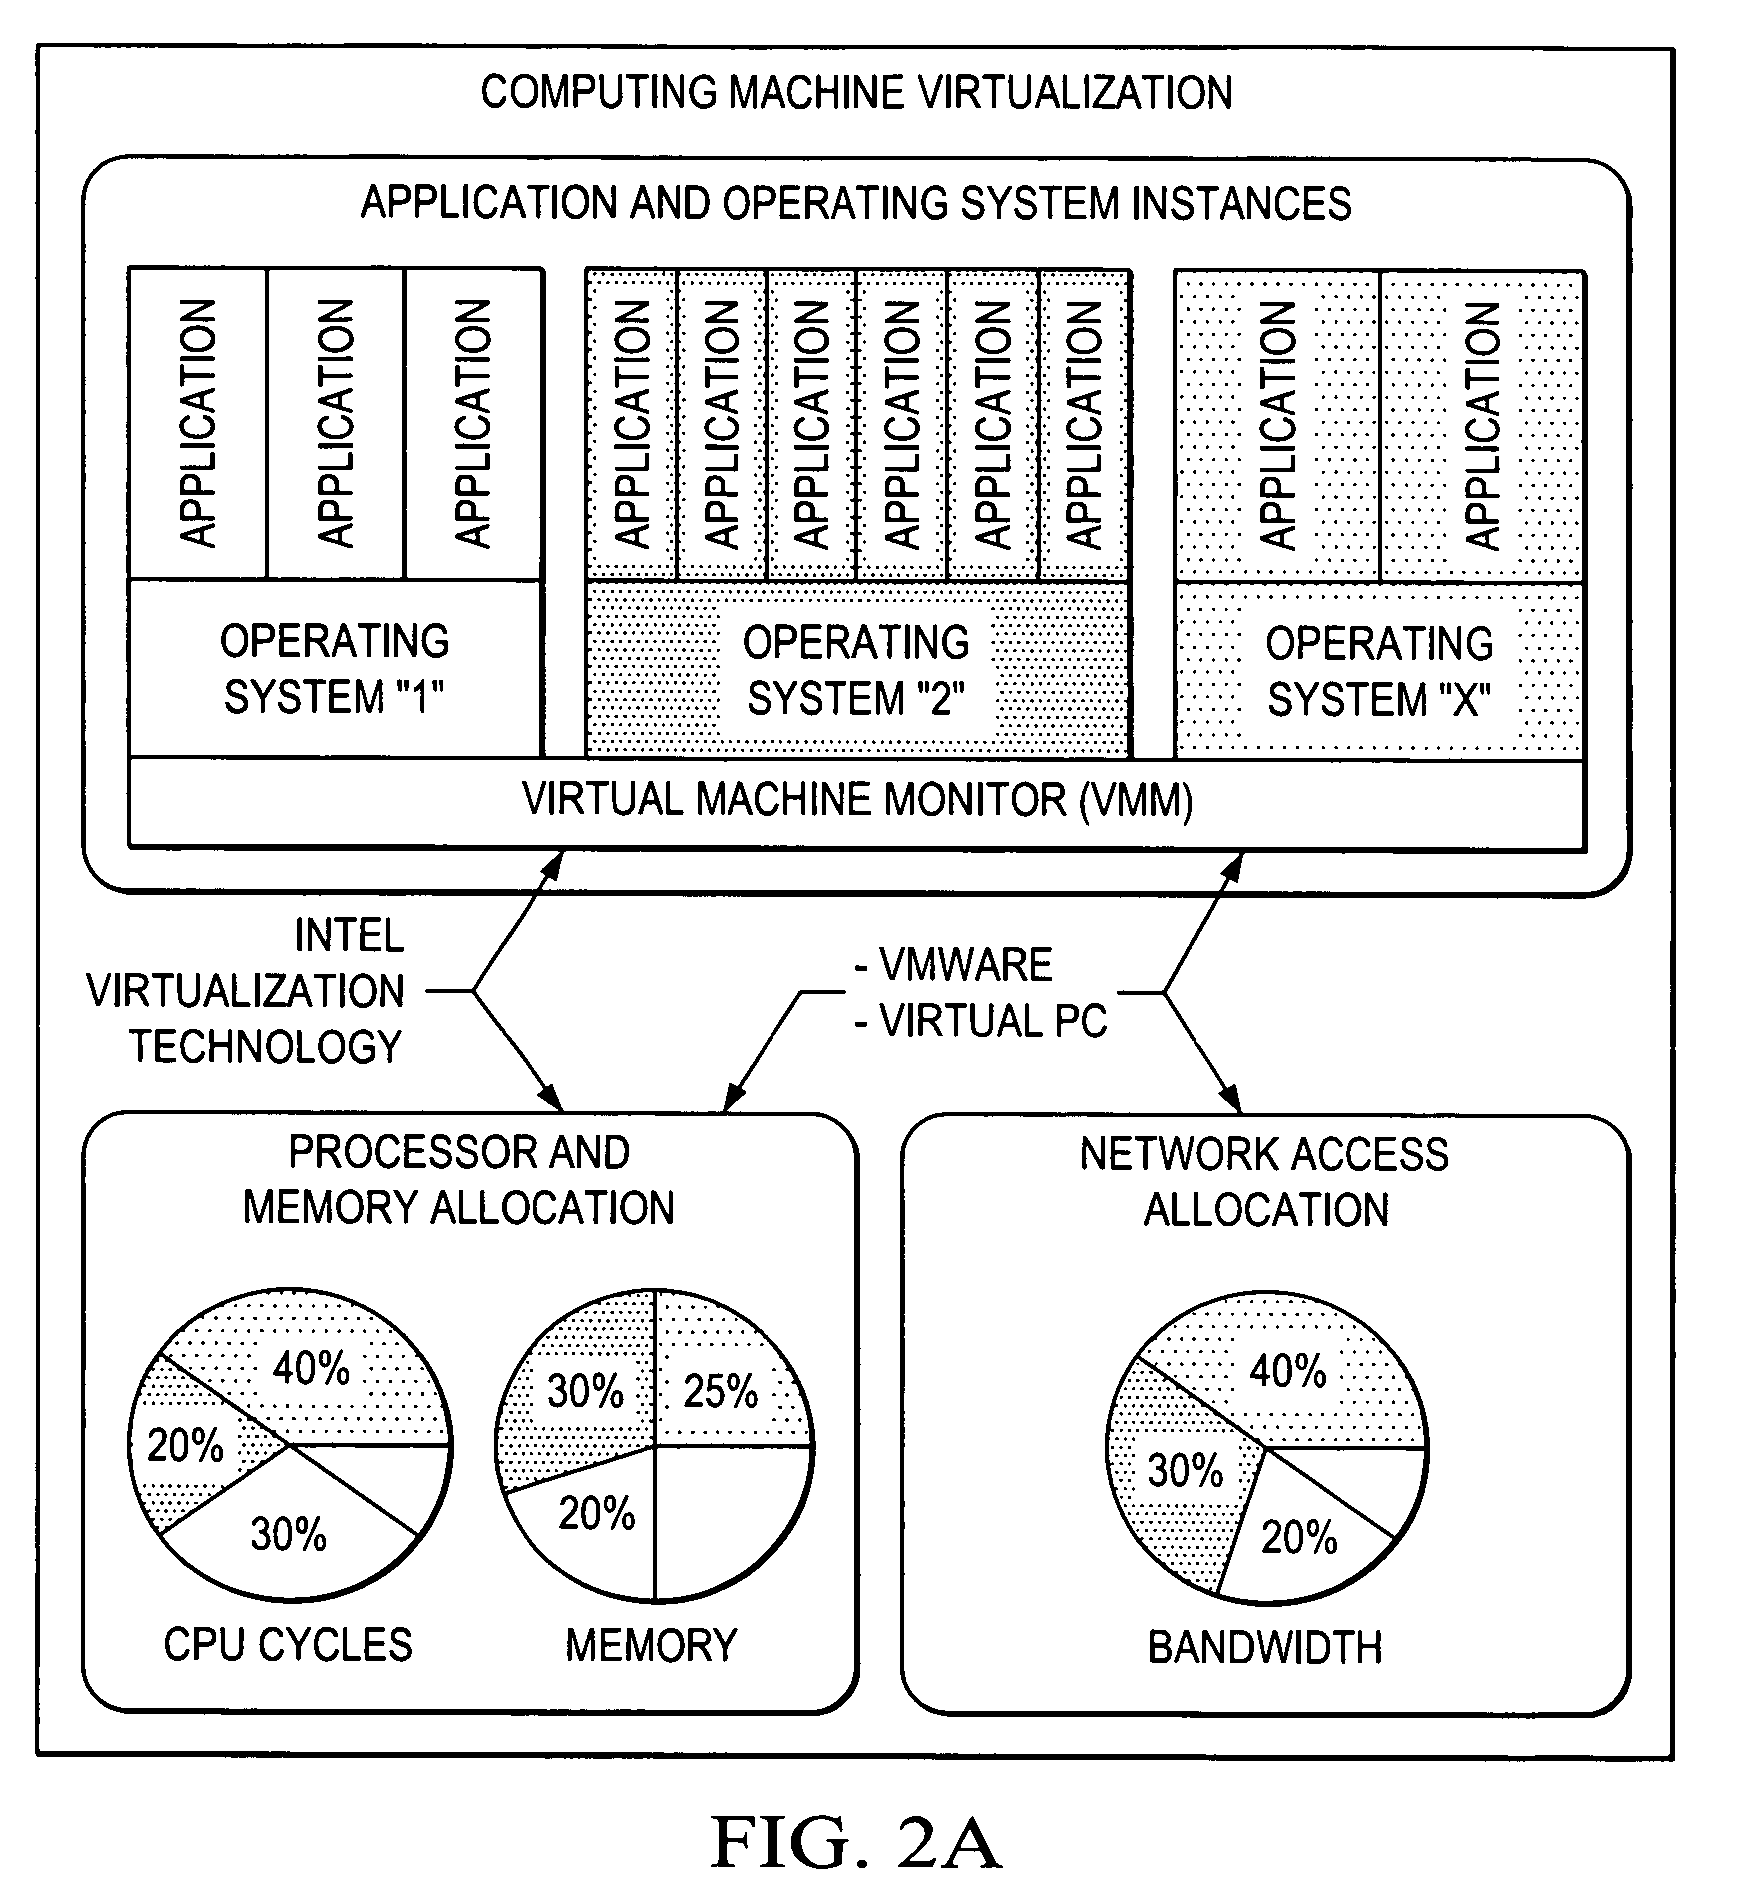 Virtualization of a host computer's native I/O system architecture via the internet and LANs